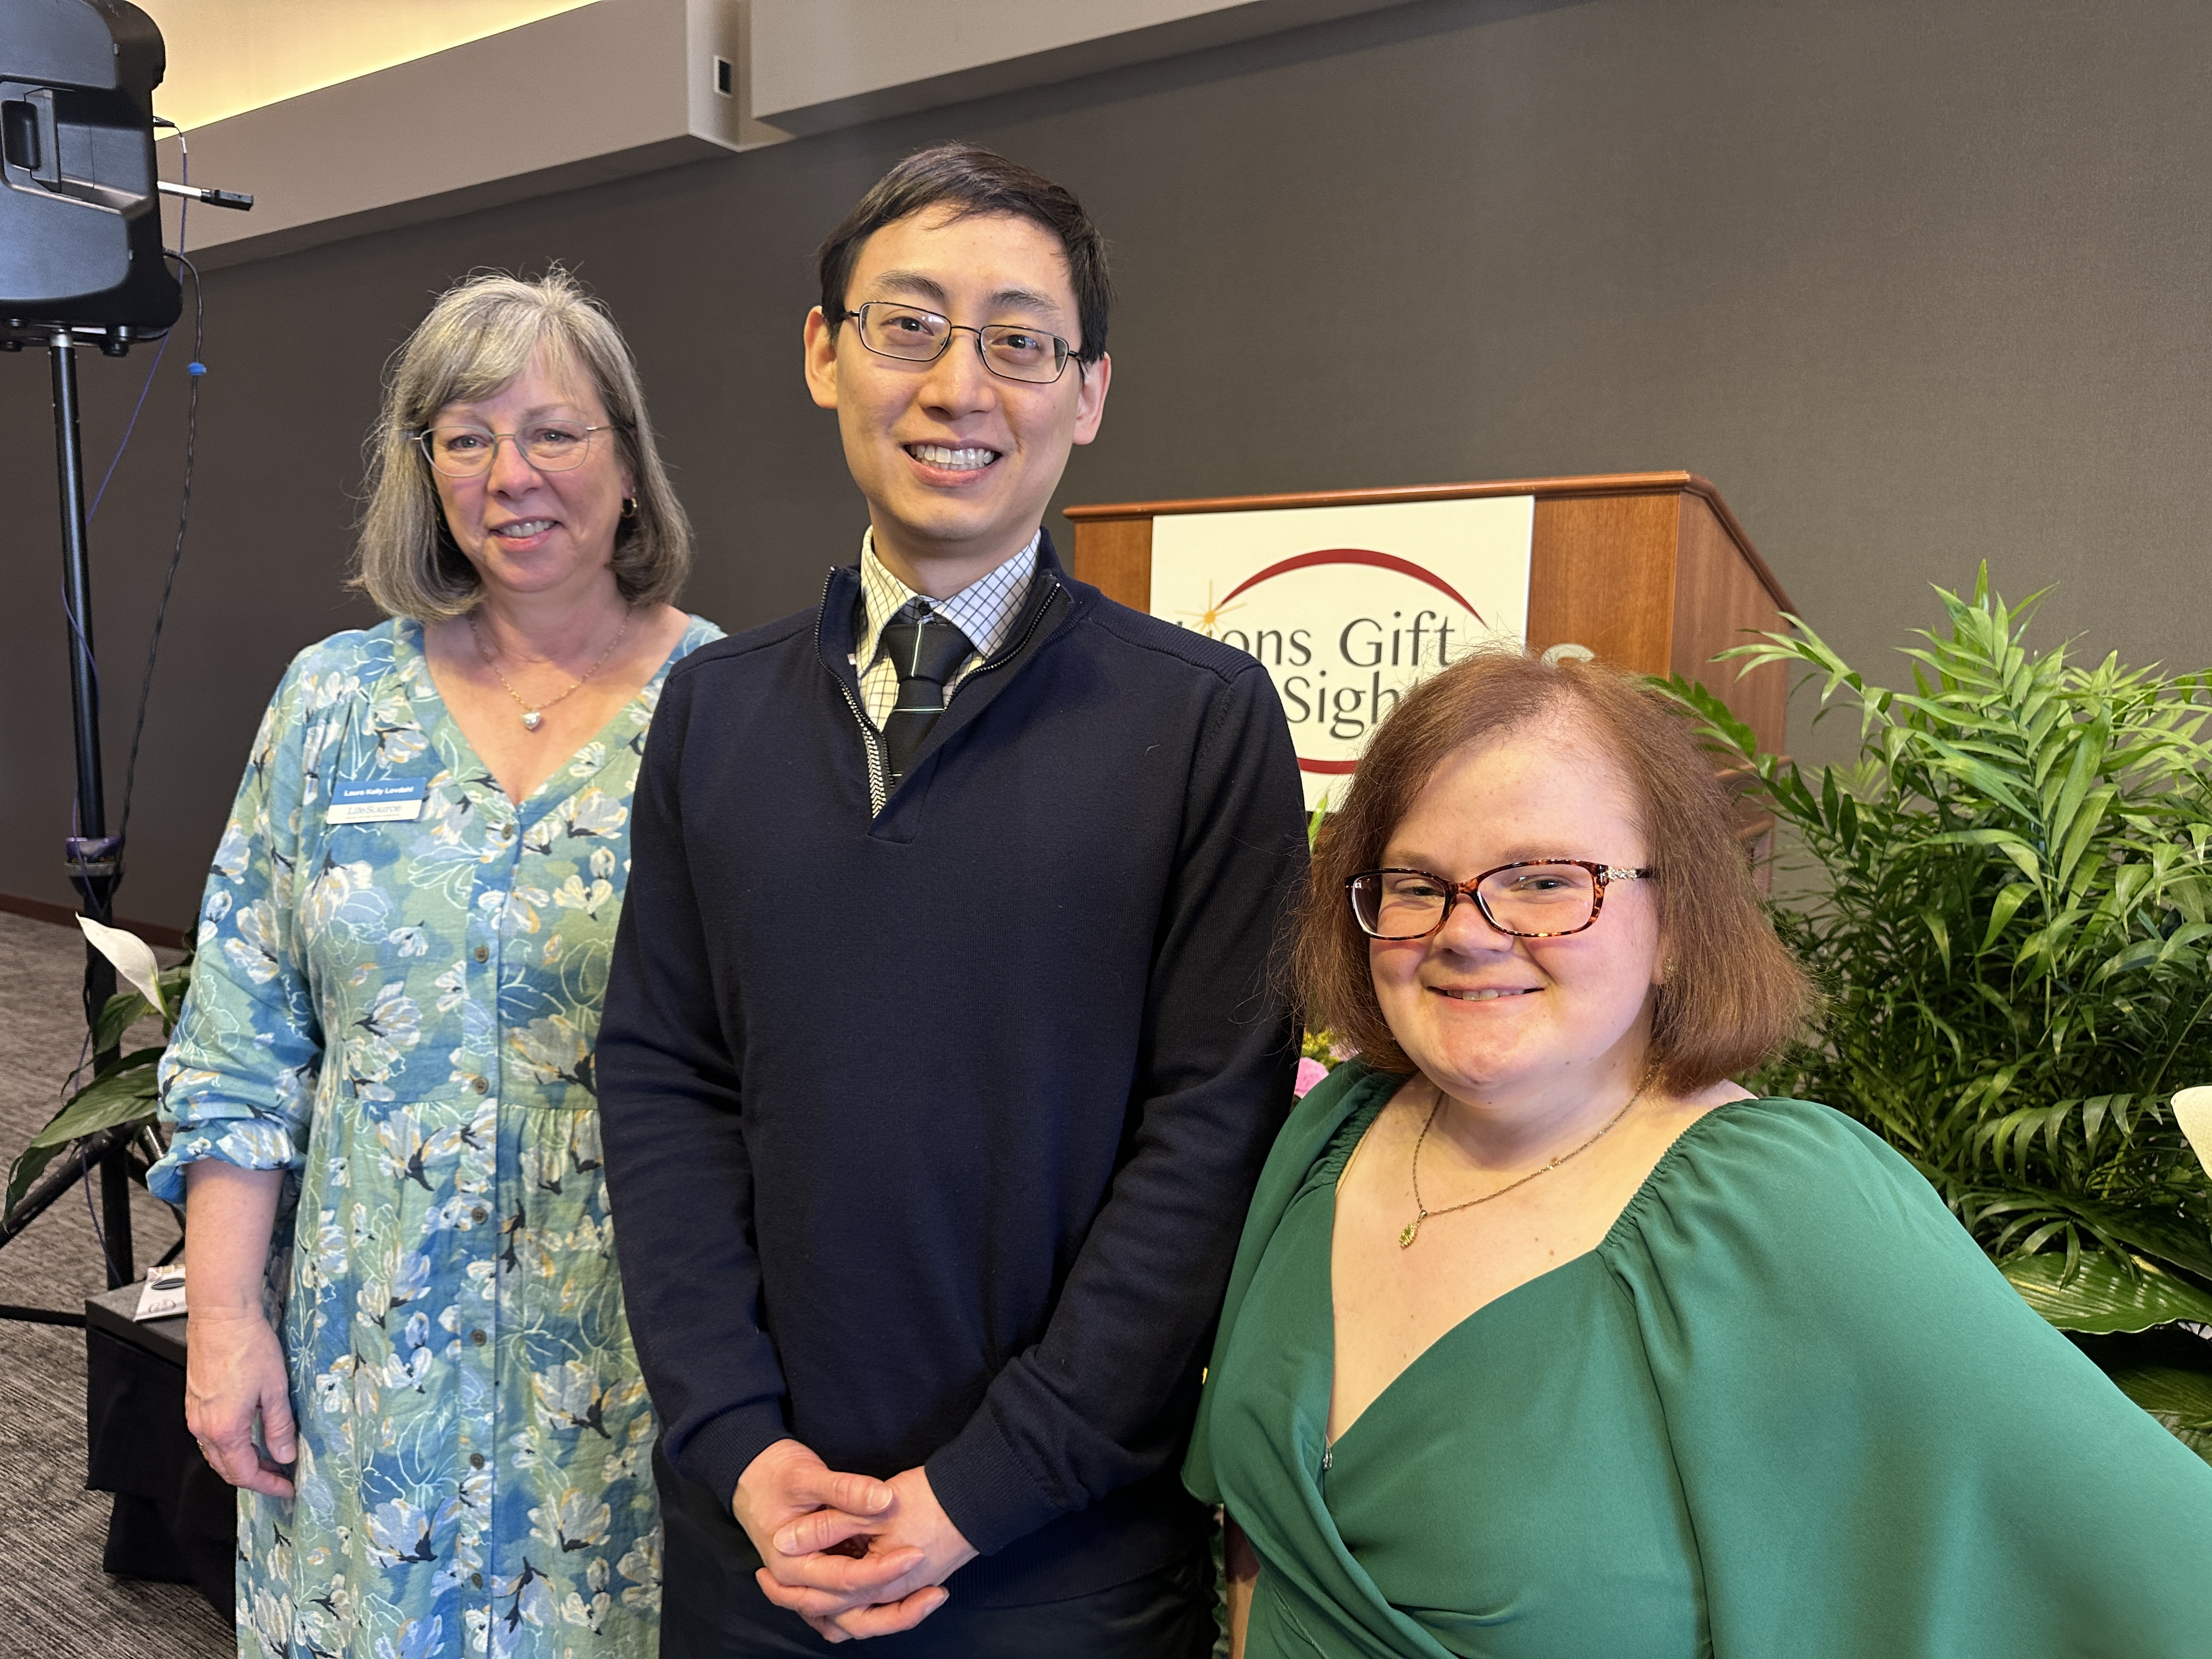 Photo. Donor Recognition Program guest speakers, left to right, Laura Kelly-Lovdahl (donor daughter), Dr. Joshua Hou (surgeon and scientist), and Jessica Moore (corneal recipient).